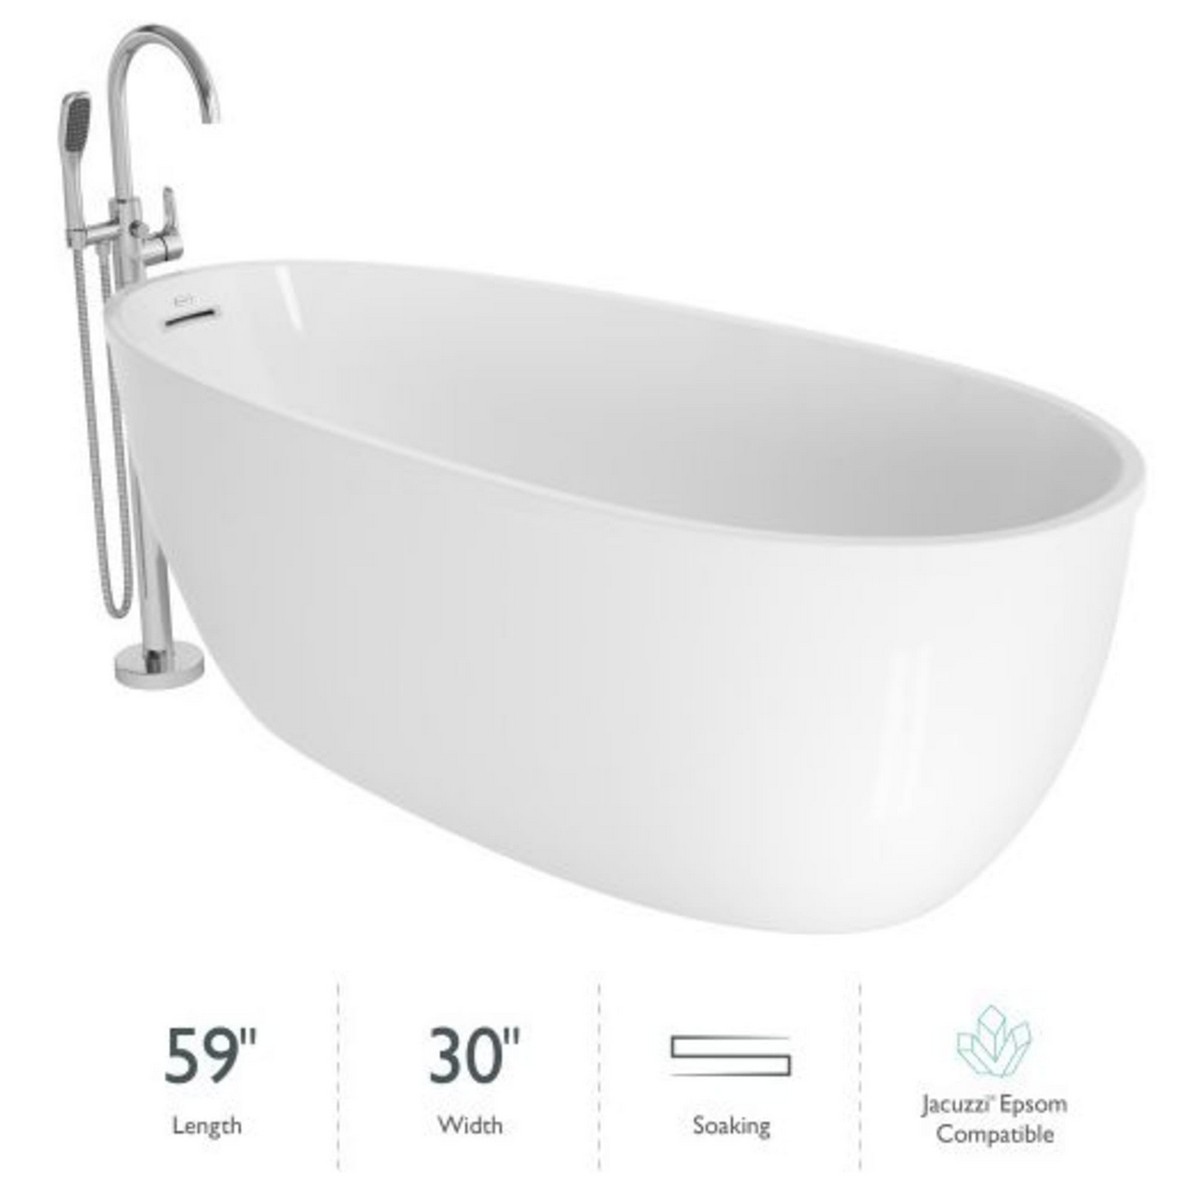 JACUZZI OS5930BUXXXXG SIGNATURE 59 1/4 X 29 3/4 INCH FREESTANDING ACRYLIC SOAKING BATHTUB WITH FREESTANDING TUB FILLER AND HAND SHOWER